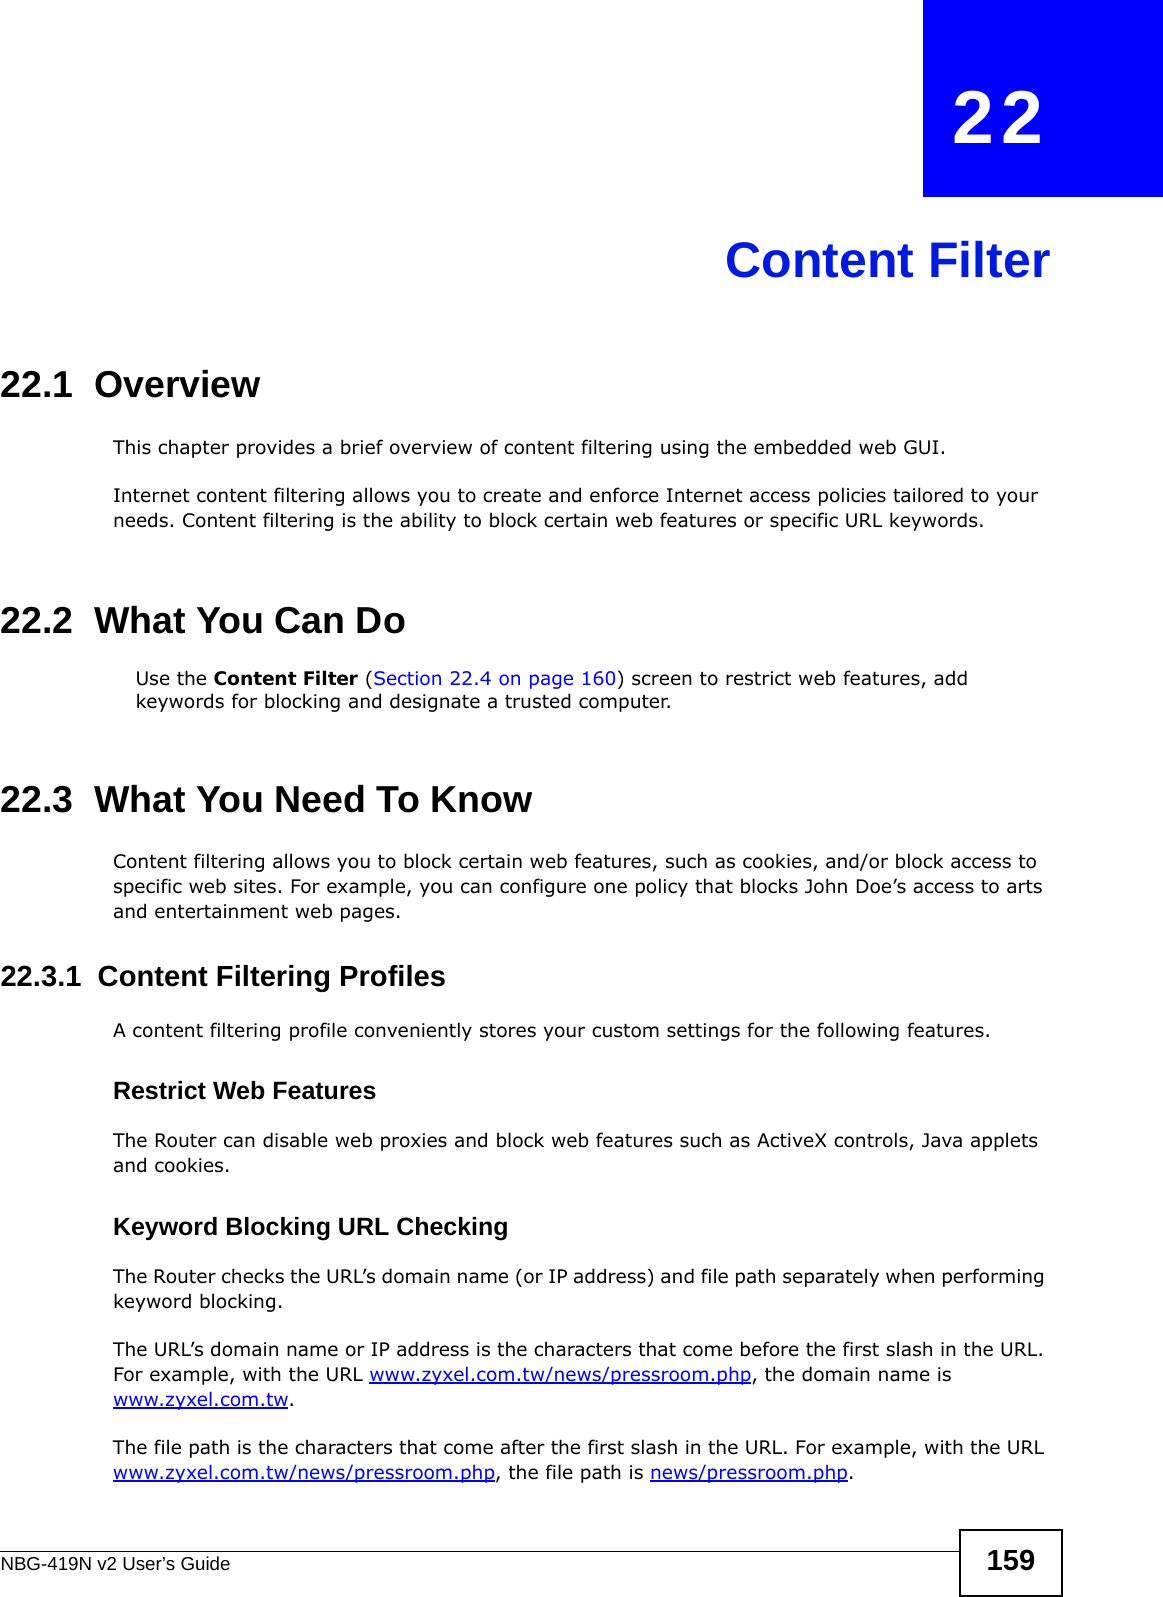 NBG-419N v2 User’s Guide 159CHAPTER   22Content Filter22.1  OverviewThis chapter provides a brief overview of content filtering using the embedded web GUI.Internet content filtering allows you to create and enforce Internet access policies tailored to your needs. Content filtering is the ability to block certain web features or specific URL keywords.22.2  What You Can DoUse the Content Filter (Section 22.4 on page 160) screen to restrict web features, add keywords for blocking and designate a trusted computer.22.3  What You Need To KnowContent filtering allows you to block certain web features, such as cookies, and/or block access to specific web sites. For example, you can configure one policy that blocks John Doe’s access to arts and entertainment web pages.22.3.1  Content Filtering ProfilesA content filtering profile conveniently stores your custom settings for the following features.Restrict Web FeaturesThe Router can disable web proxies and block web features such as ActiveX controls, Java applets and cookies.Keyword Blocking URL CheckingThe Router checks the URL’s domain name (or IP address) and file path separately when performing keyword blocking. The URL’s domain name or IP address is the characters that come before the first slash in the URL. For example, with the URL www.zyxel.com.tw/news/pressroom.php, the domain name is www.zyxel.com.tw.The file path is the characters that come after the first slash in the URL. For example, with the URL www.zyxel.com.tw/news/pressroom.php, the file path is news/pressroom.php.